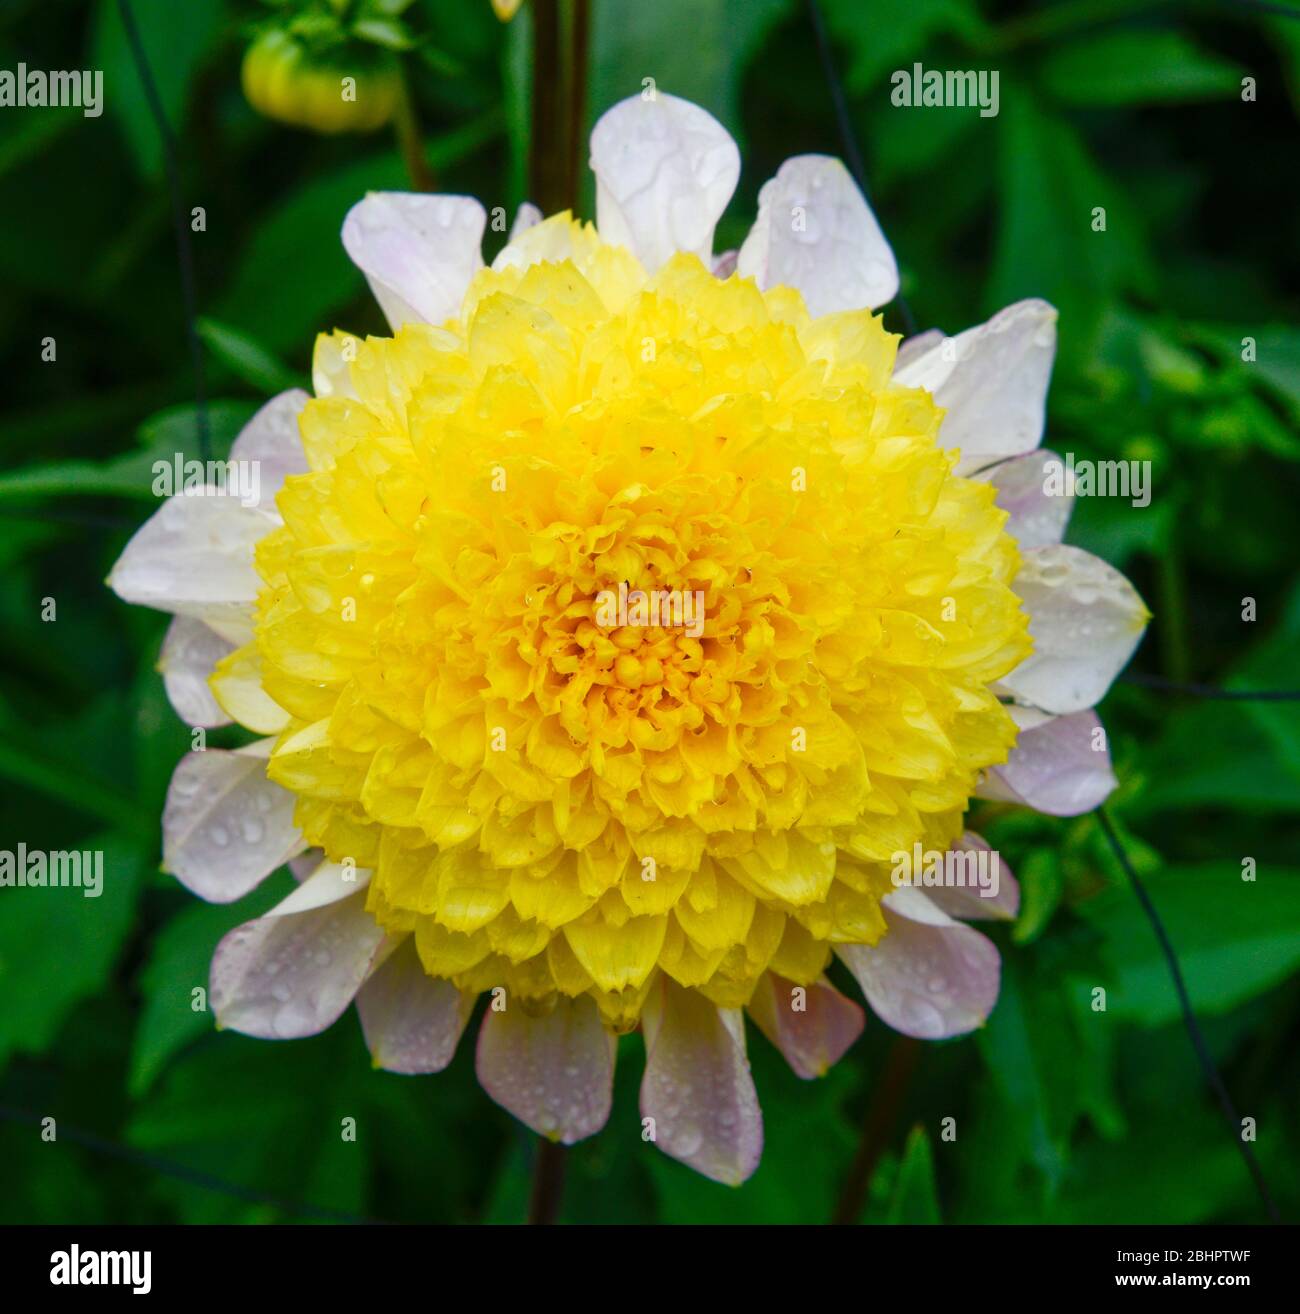 Close up of a single yellow and white Dahlia flower head with drops of water on the flower petals Stock Photo